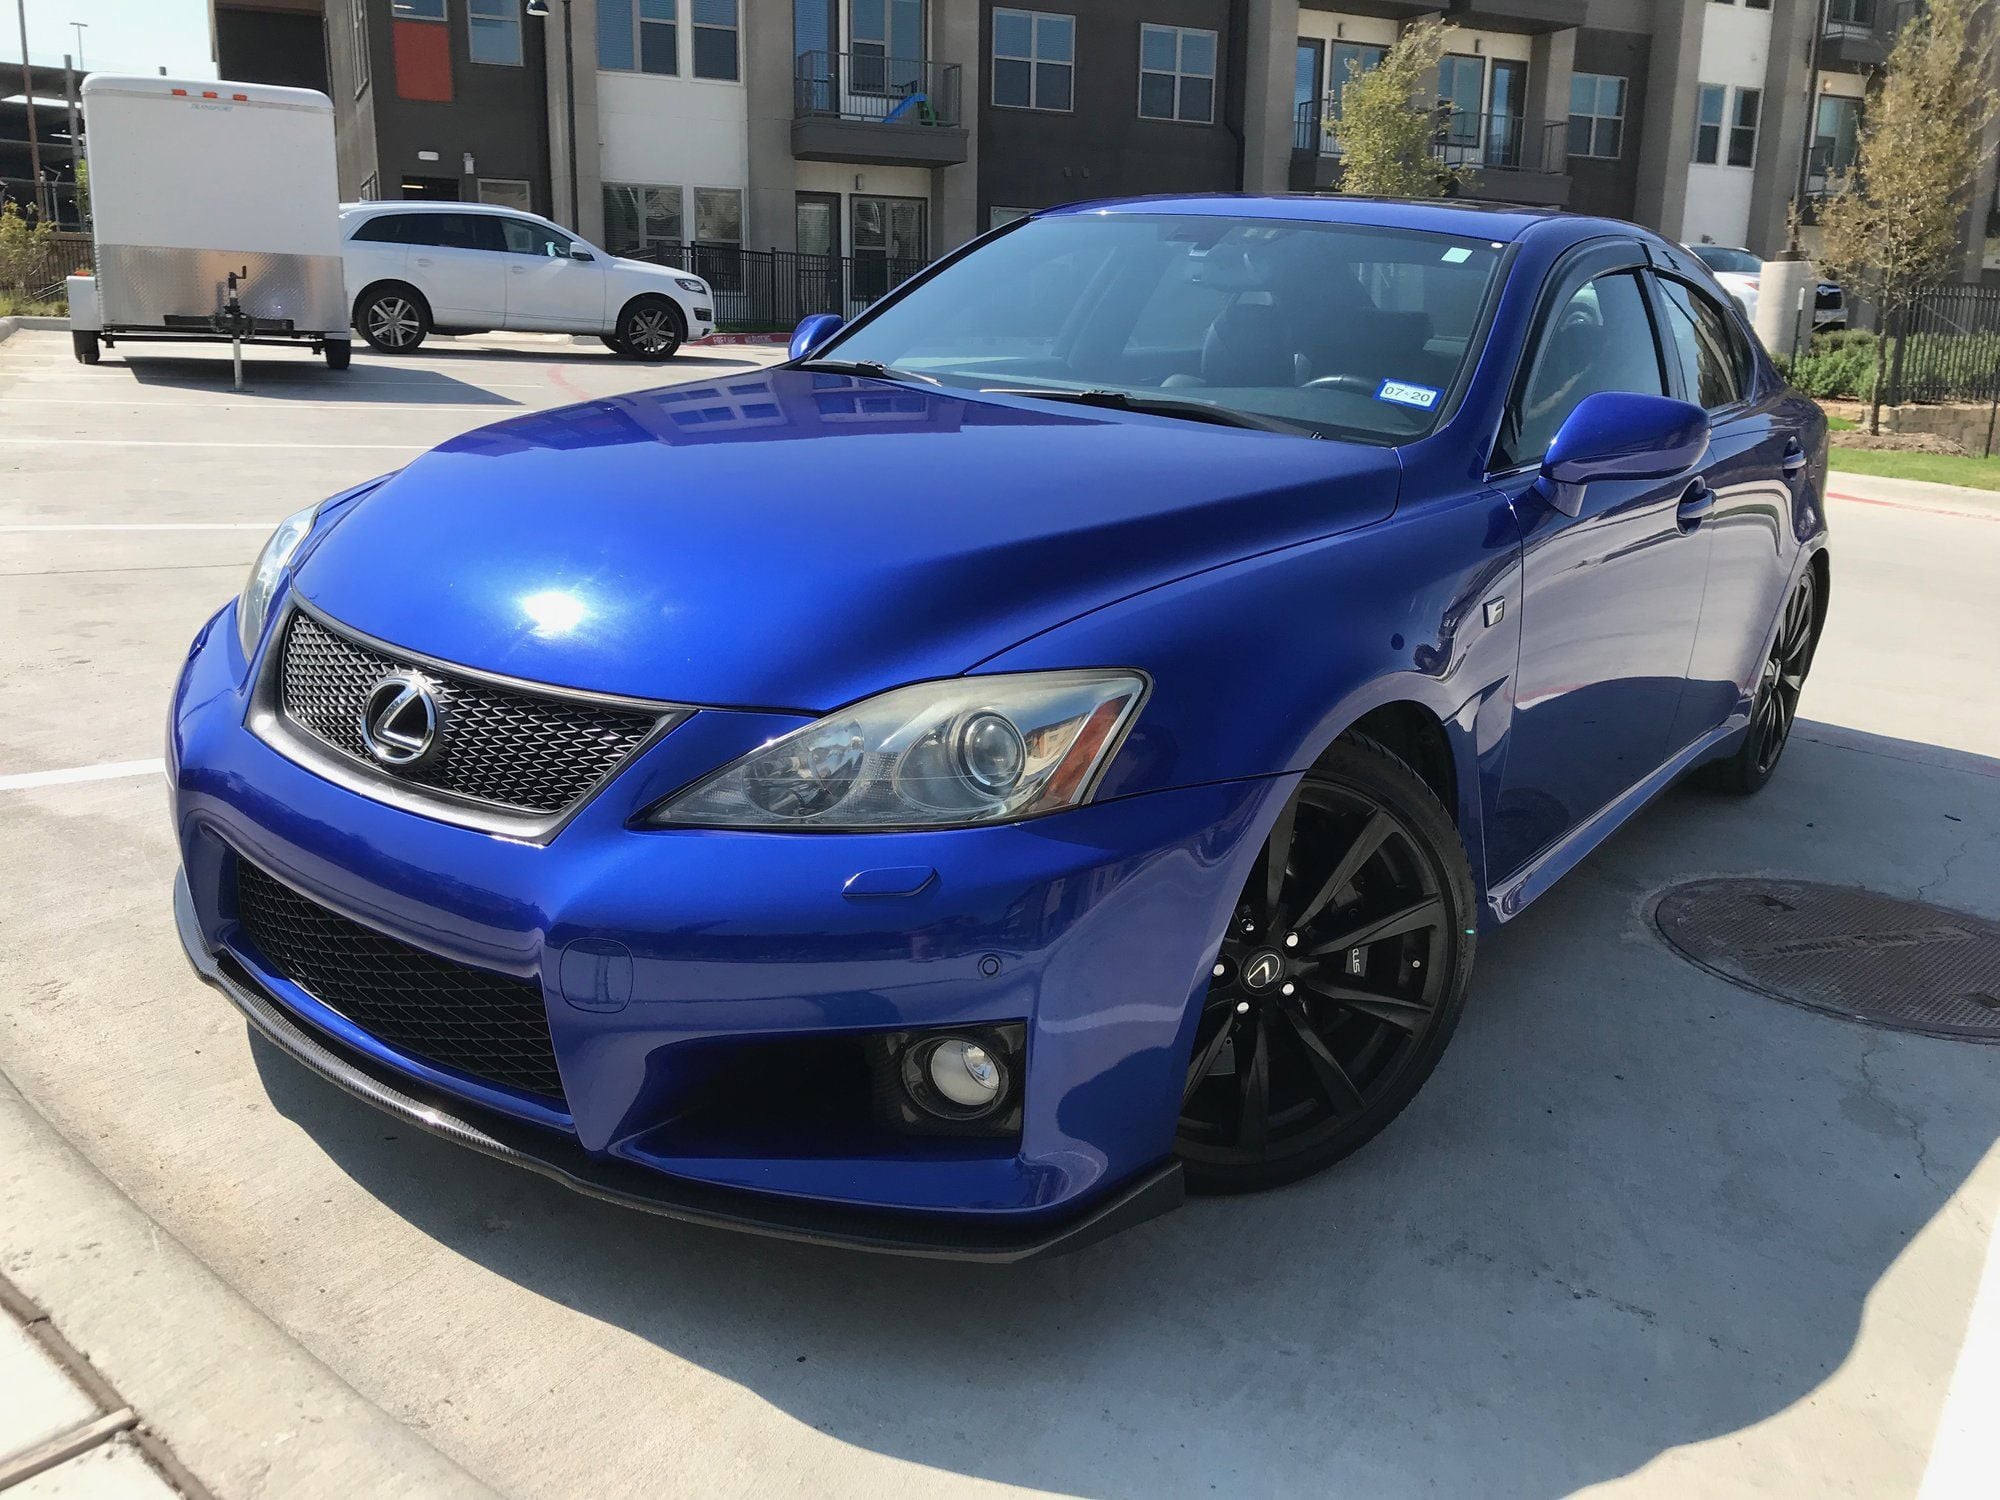 Accessories - ISF, Carbon Blades, Duck Spoiler, Vent Visors - Used - 2008 to 2014 Lexus IS F - Orlando, FL 32801, United States